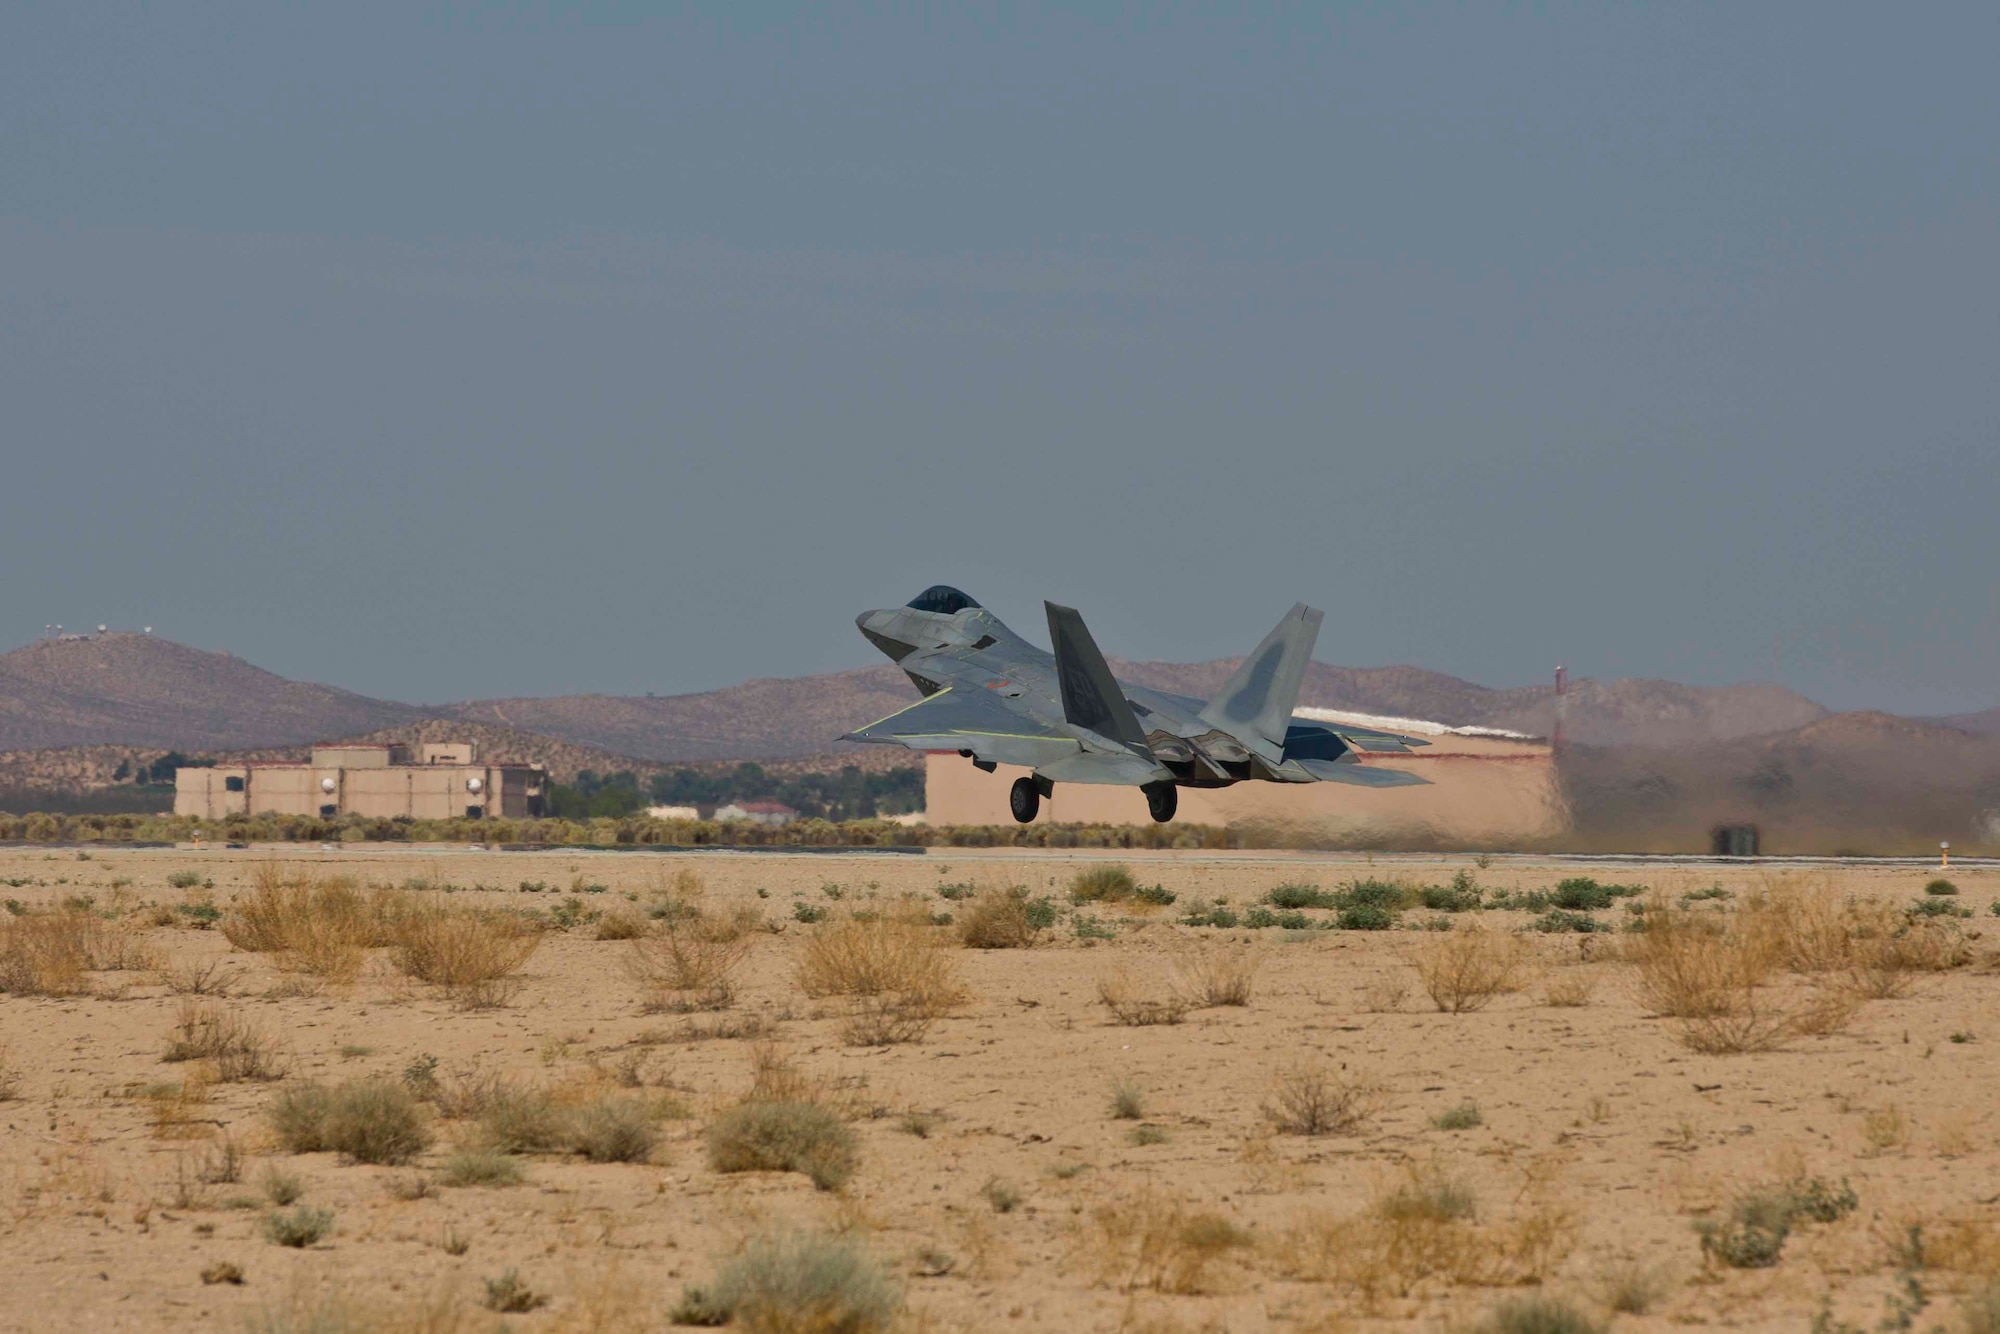 F-22 Raptor #4006 makes its second flight July 18 following an extensive refurbishment to get it back in the air. (Courtesy photo by Christopher Higgins/Lockheed Martin)